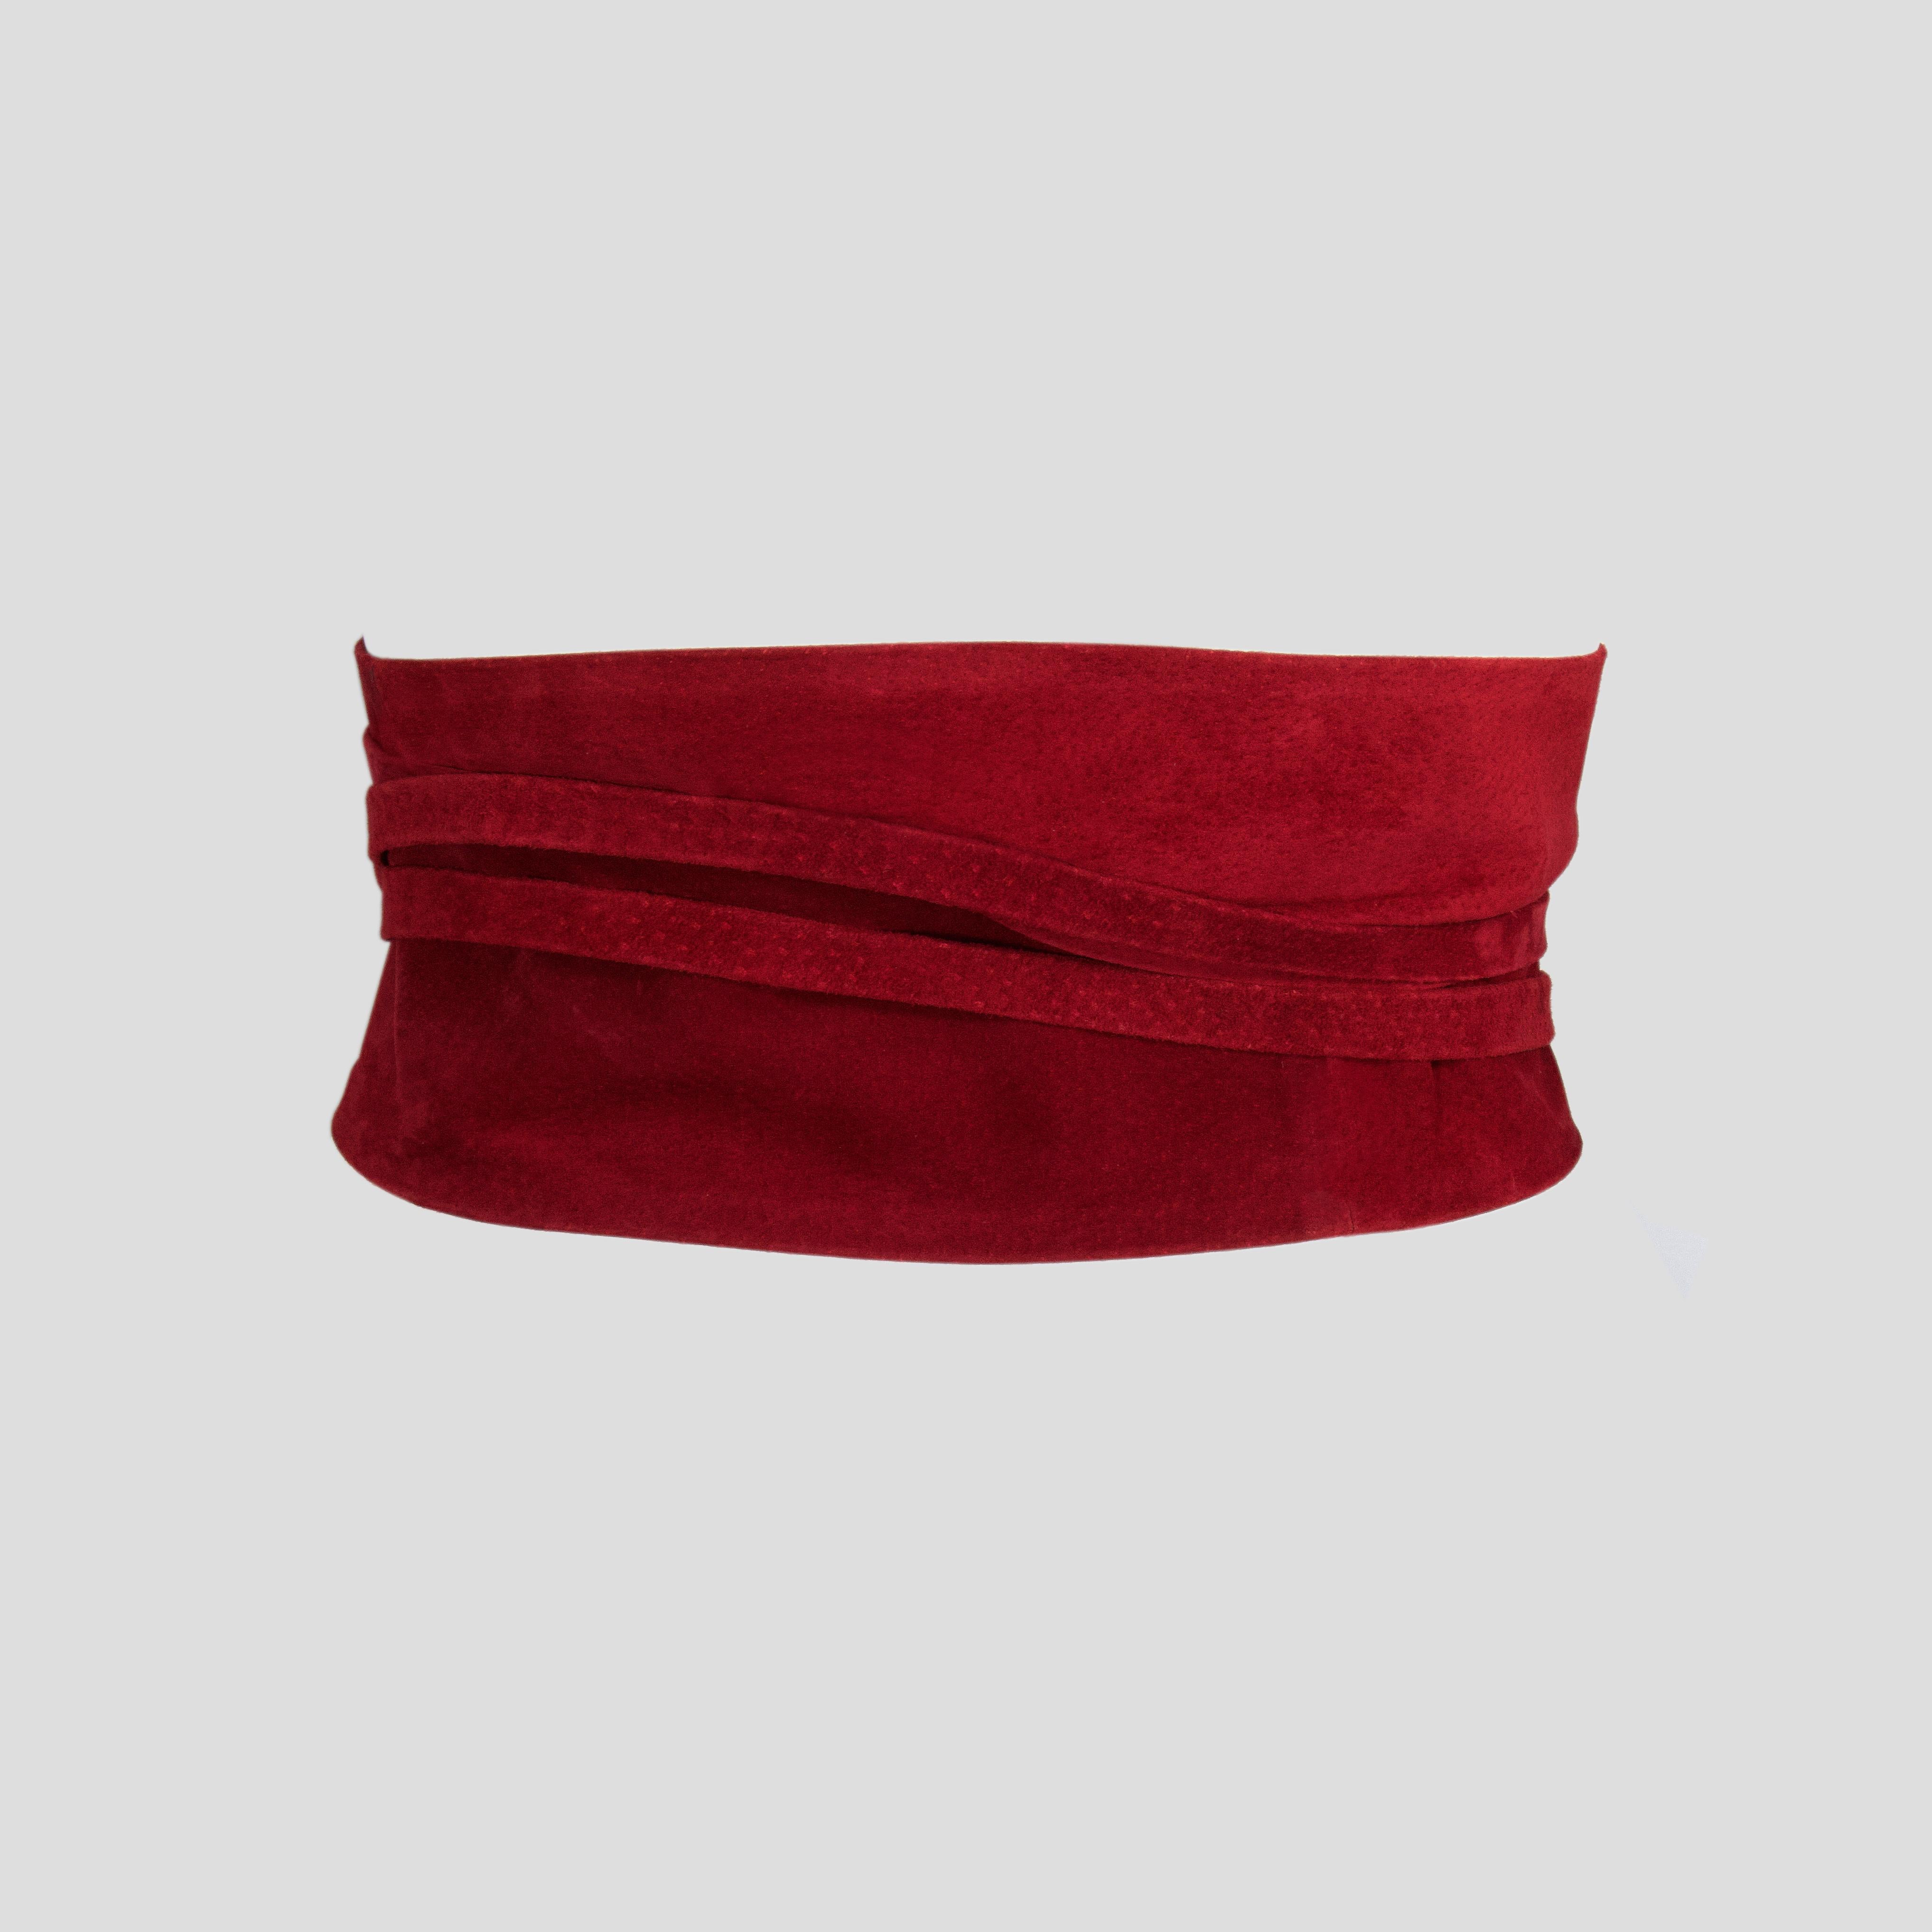 Product Details: Viktor Sabo - Red Suede - Wrap Belt - Wraparound Tie Detail / Fasten - NEW 
Label: Viktor Sabo 
Materials: Red Suede
Size: L
Belt Depth: 4 inches
Belt Length inc Tie Ends: 116 inches
Condition: NEW Without Tags